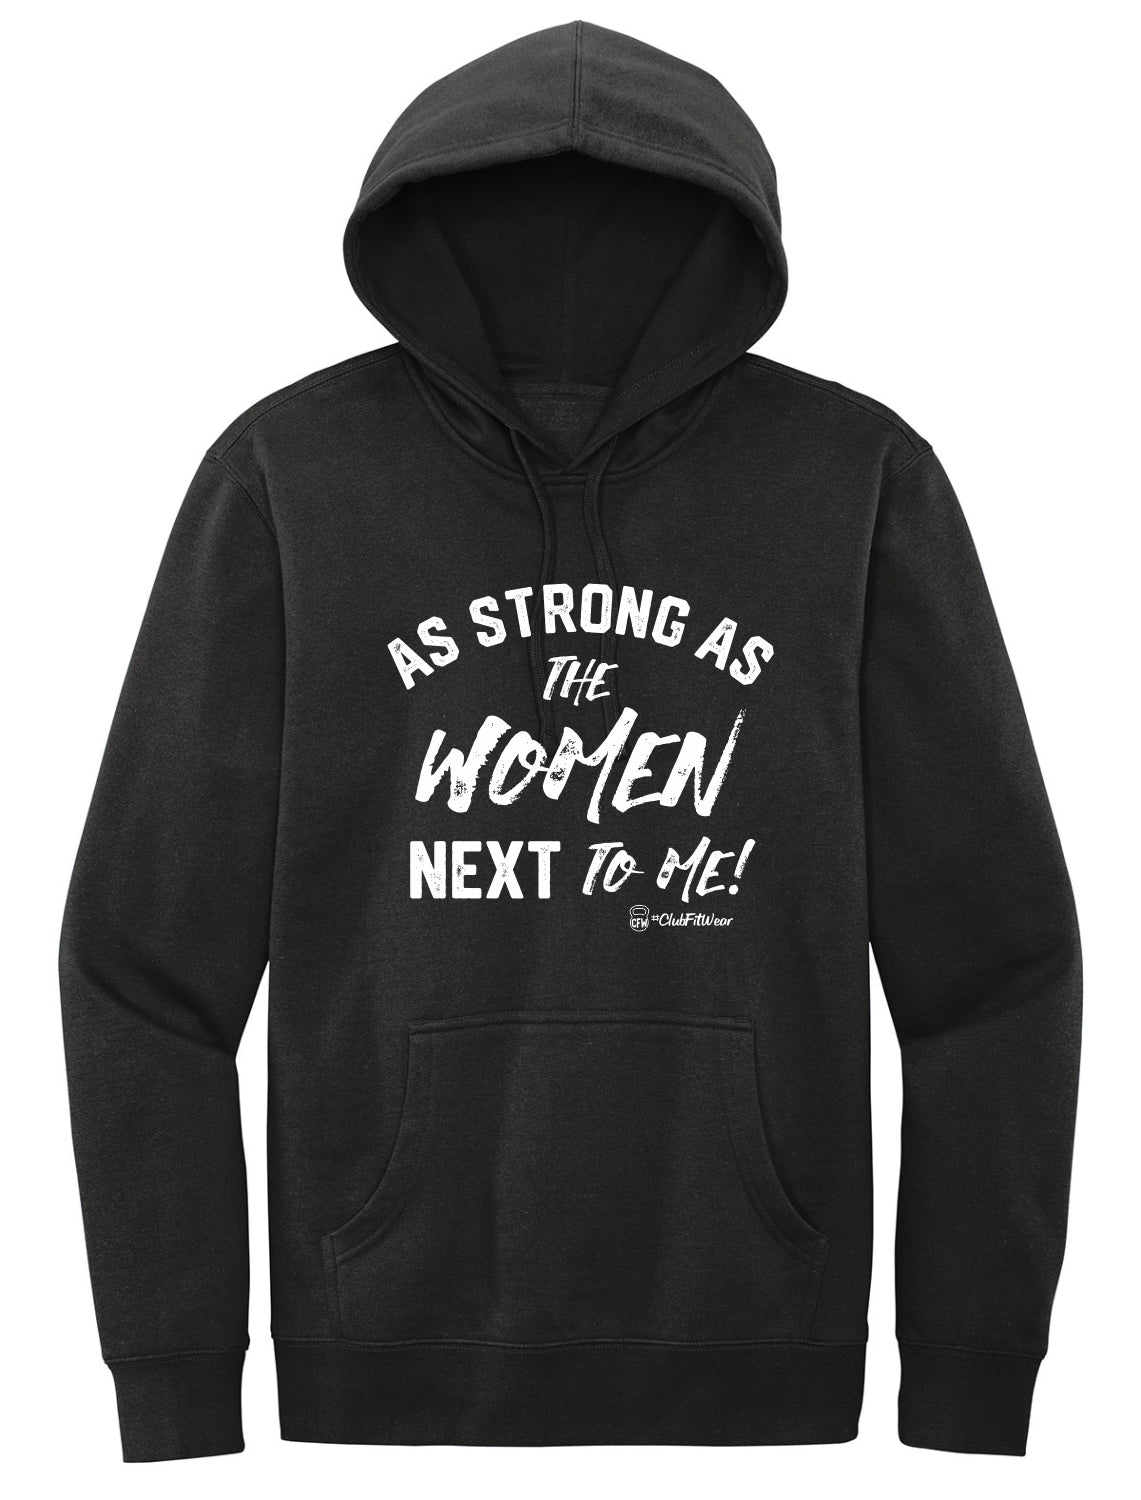 As Strong As the Women Next to Me!  - Hoodie